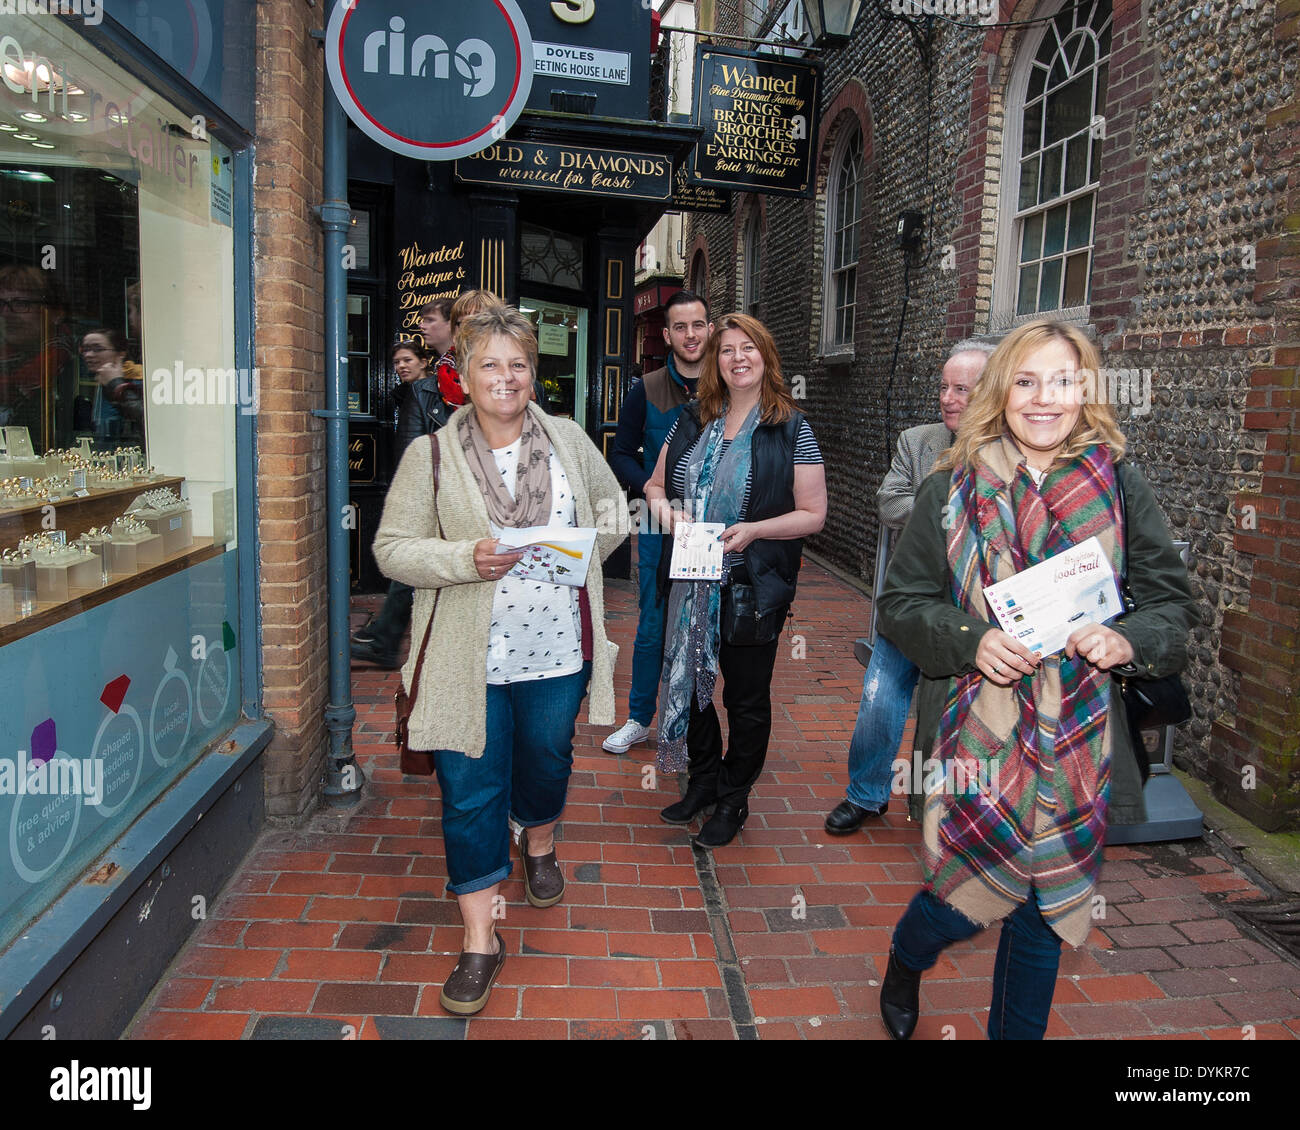 Brighton, UK. 21st April, 2014. Food Trail participants on the way to the next restaurant: Visitors on the Brighton & Hove Food and Drink Festival Food Trail in Brighton sample the delights of 10 local restaurants and bars whilst following the trail around The Lanes and North Laine of Brighton. Taking part were Aguadulce, Be At One, Boho Gelato, La Cave a Fromage, The Chilli Pickle, La Choza, Moshimo, Julien Plumart, The Manor, Yum Yum Ninja. photo Credit: Julia Claxton/Alamy Live News Stock Photo